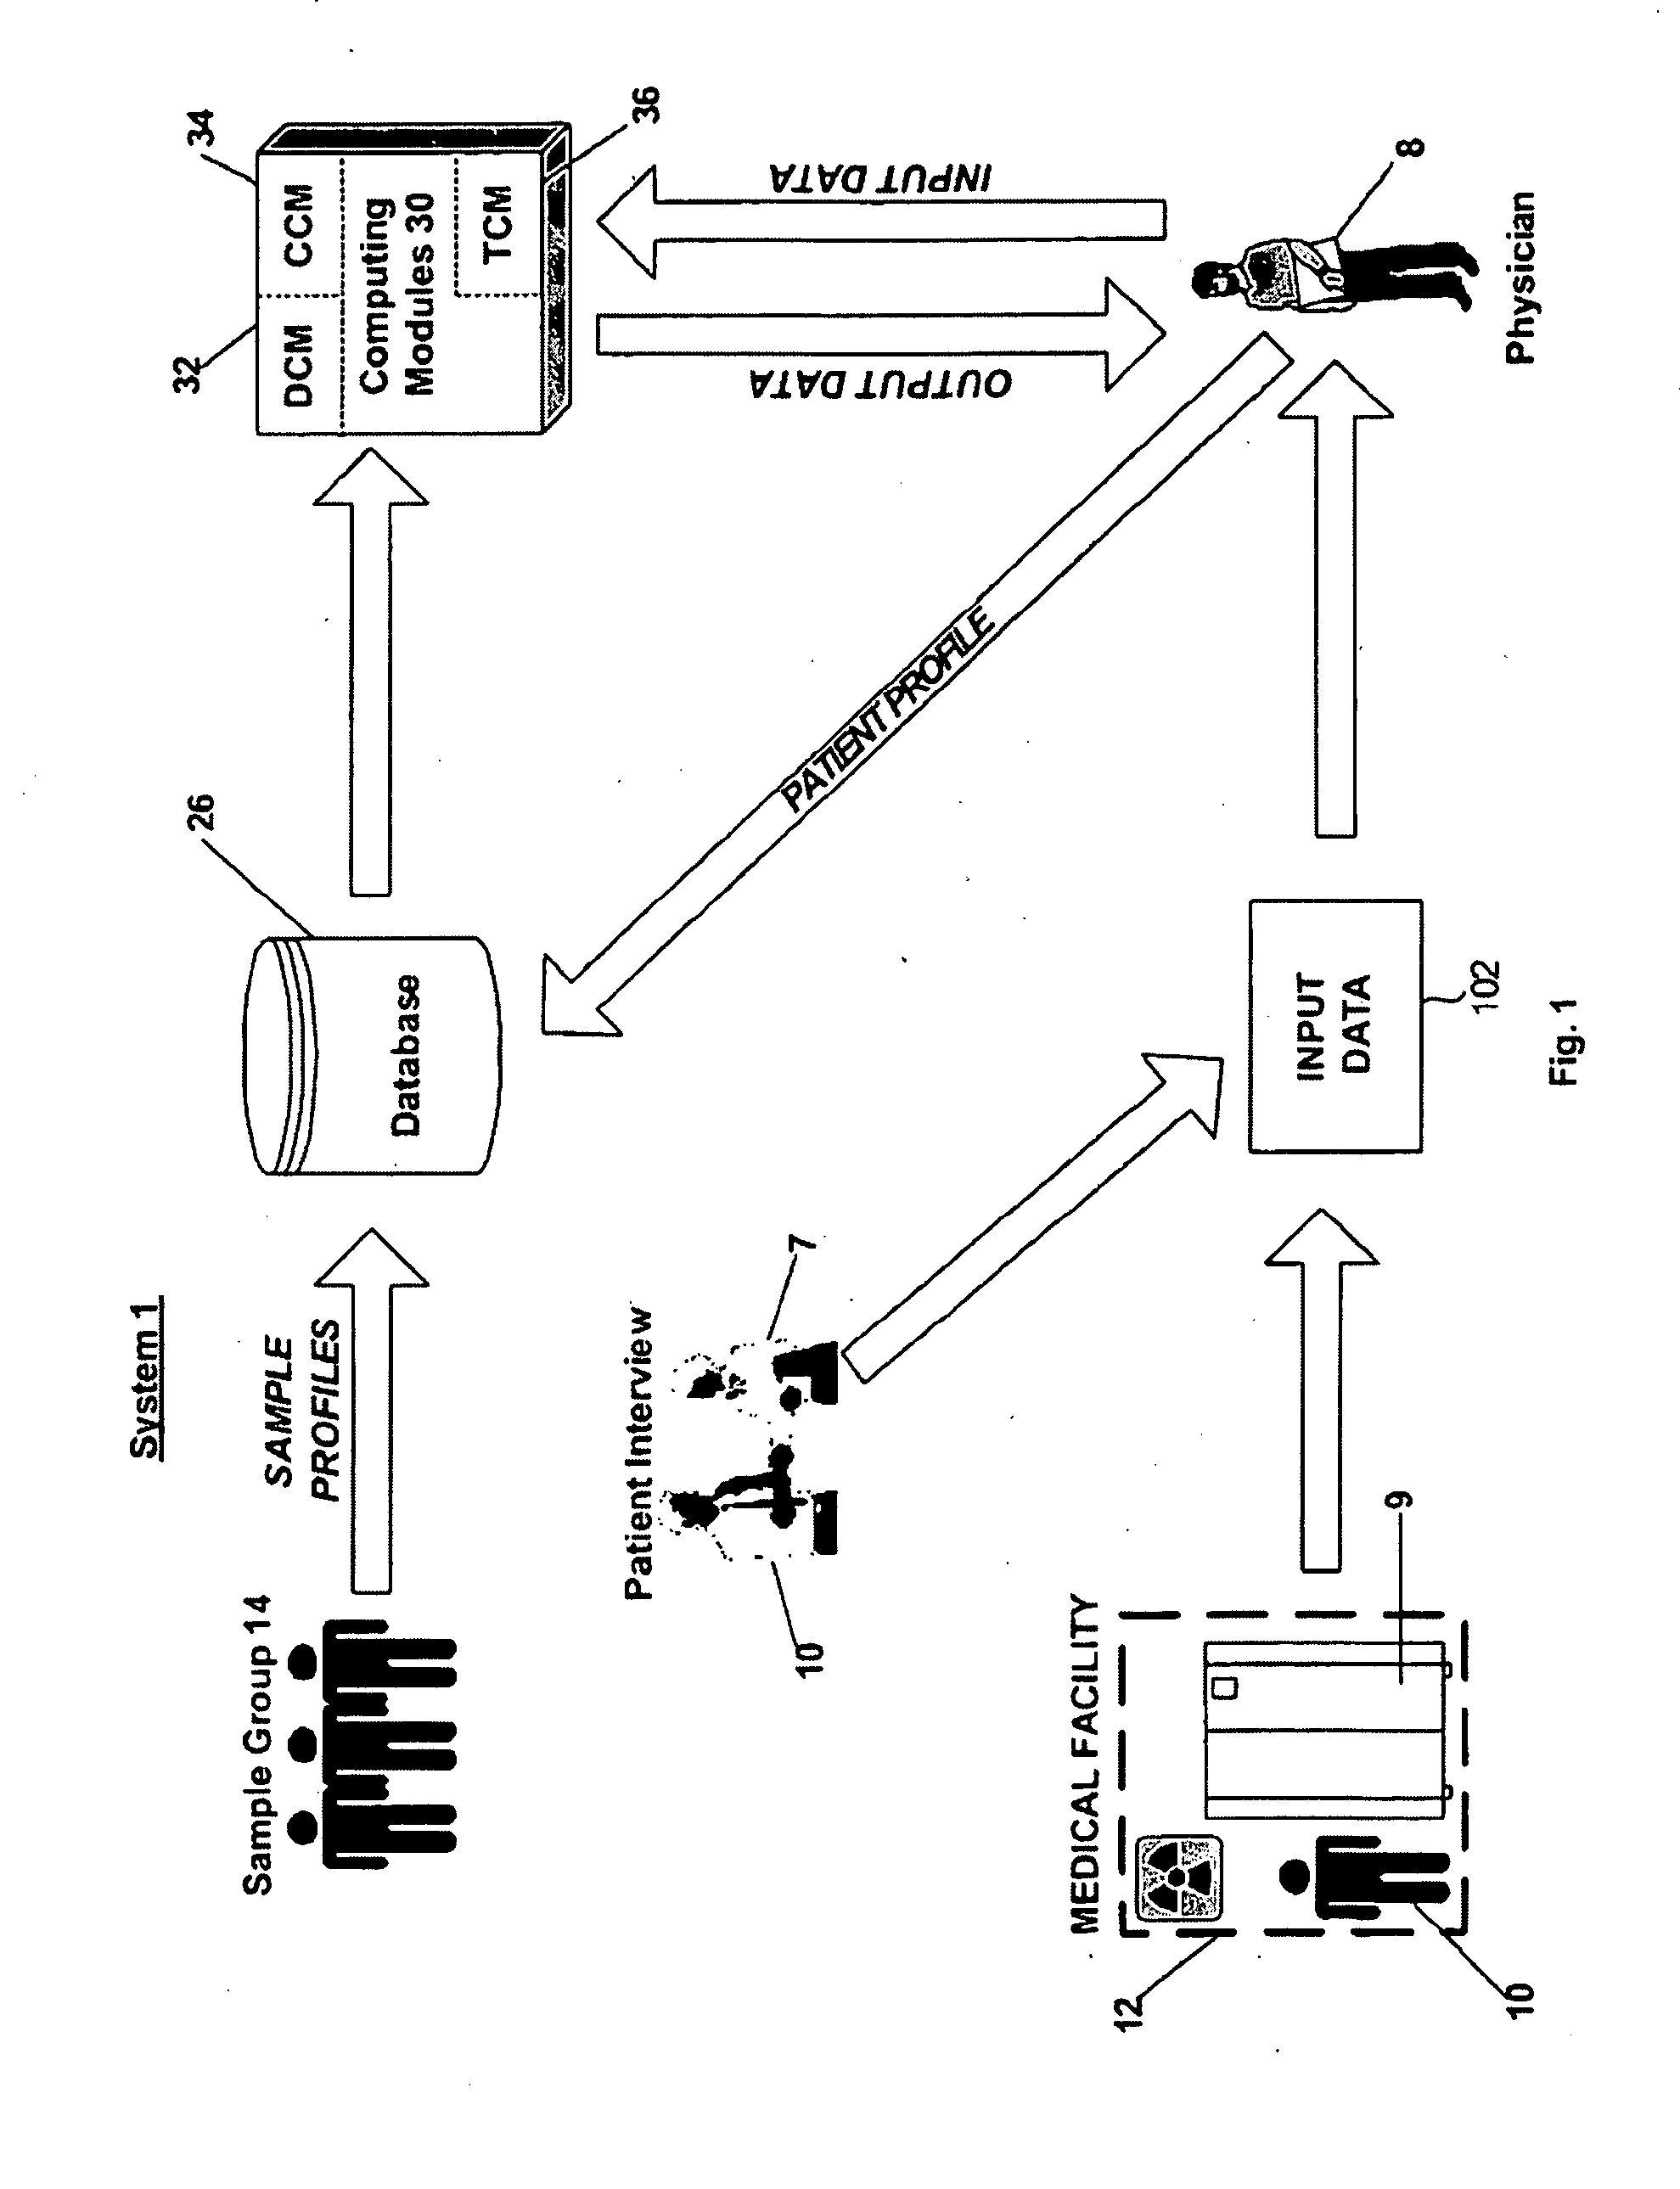 System and method for analyzing medical data to determine diagnosis and treatment